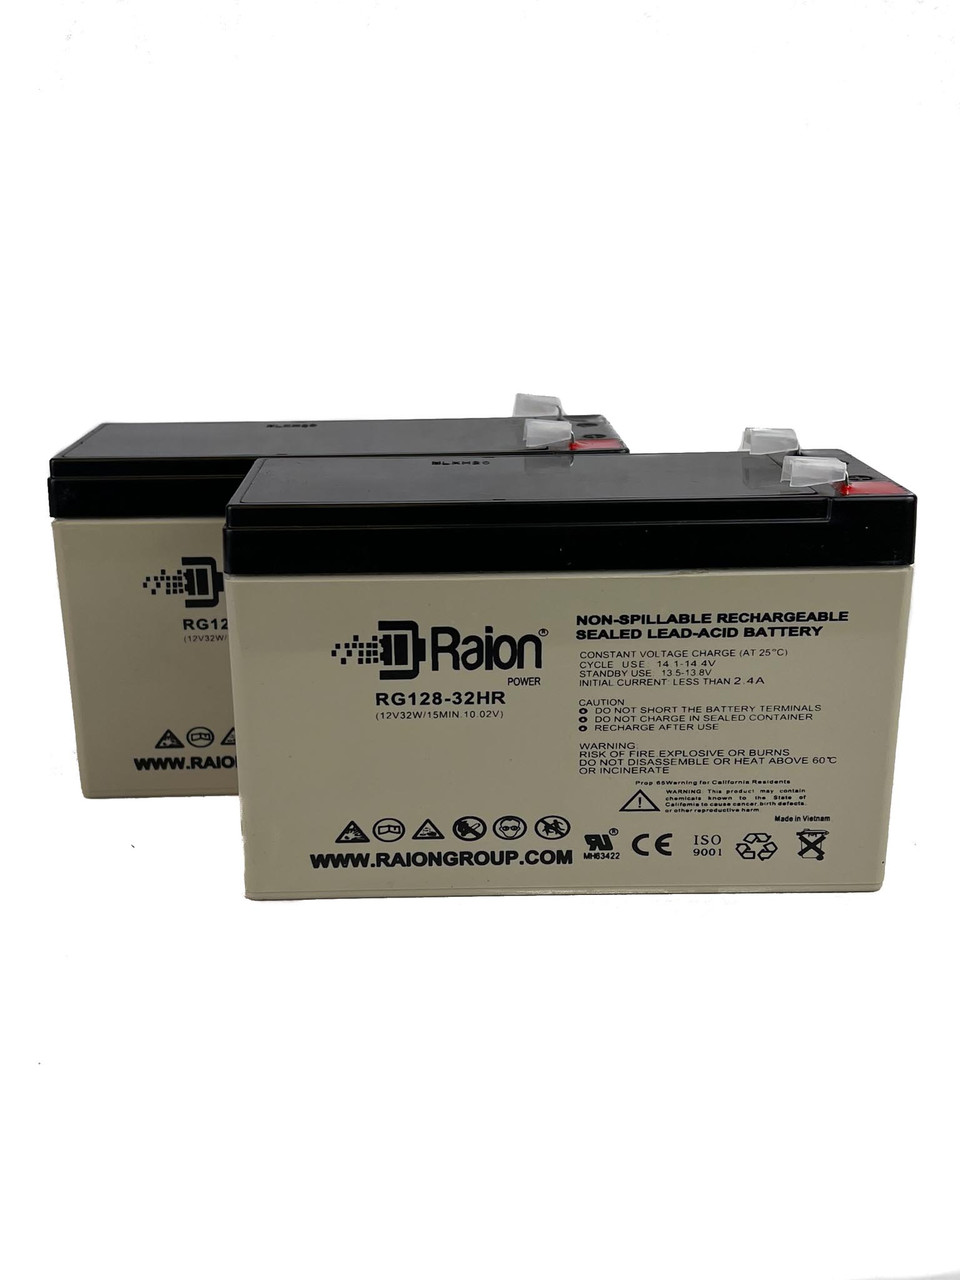 Raion Power 12V 7.5Ah High Rate Discharge UPS Batteries for APC Back-UPS XS 1500VA LCD BX1500LCD - 2 Pack